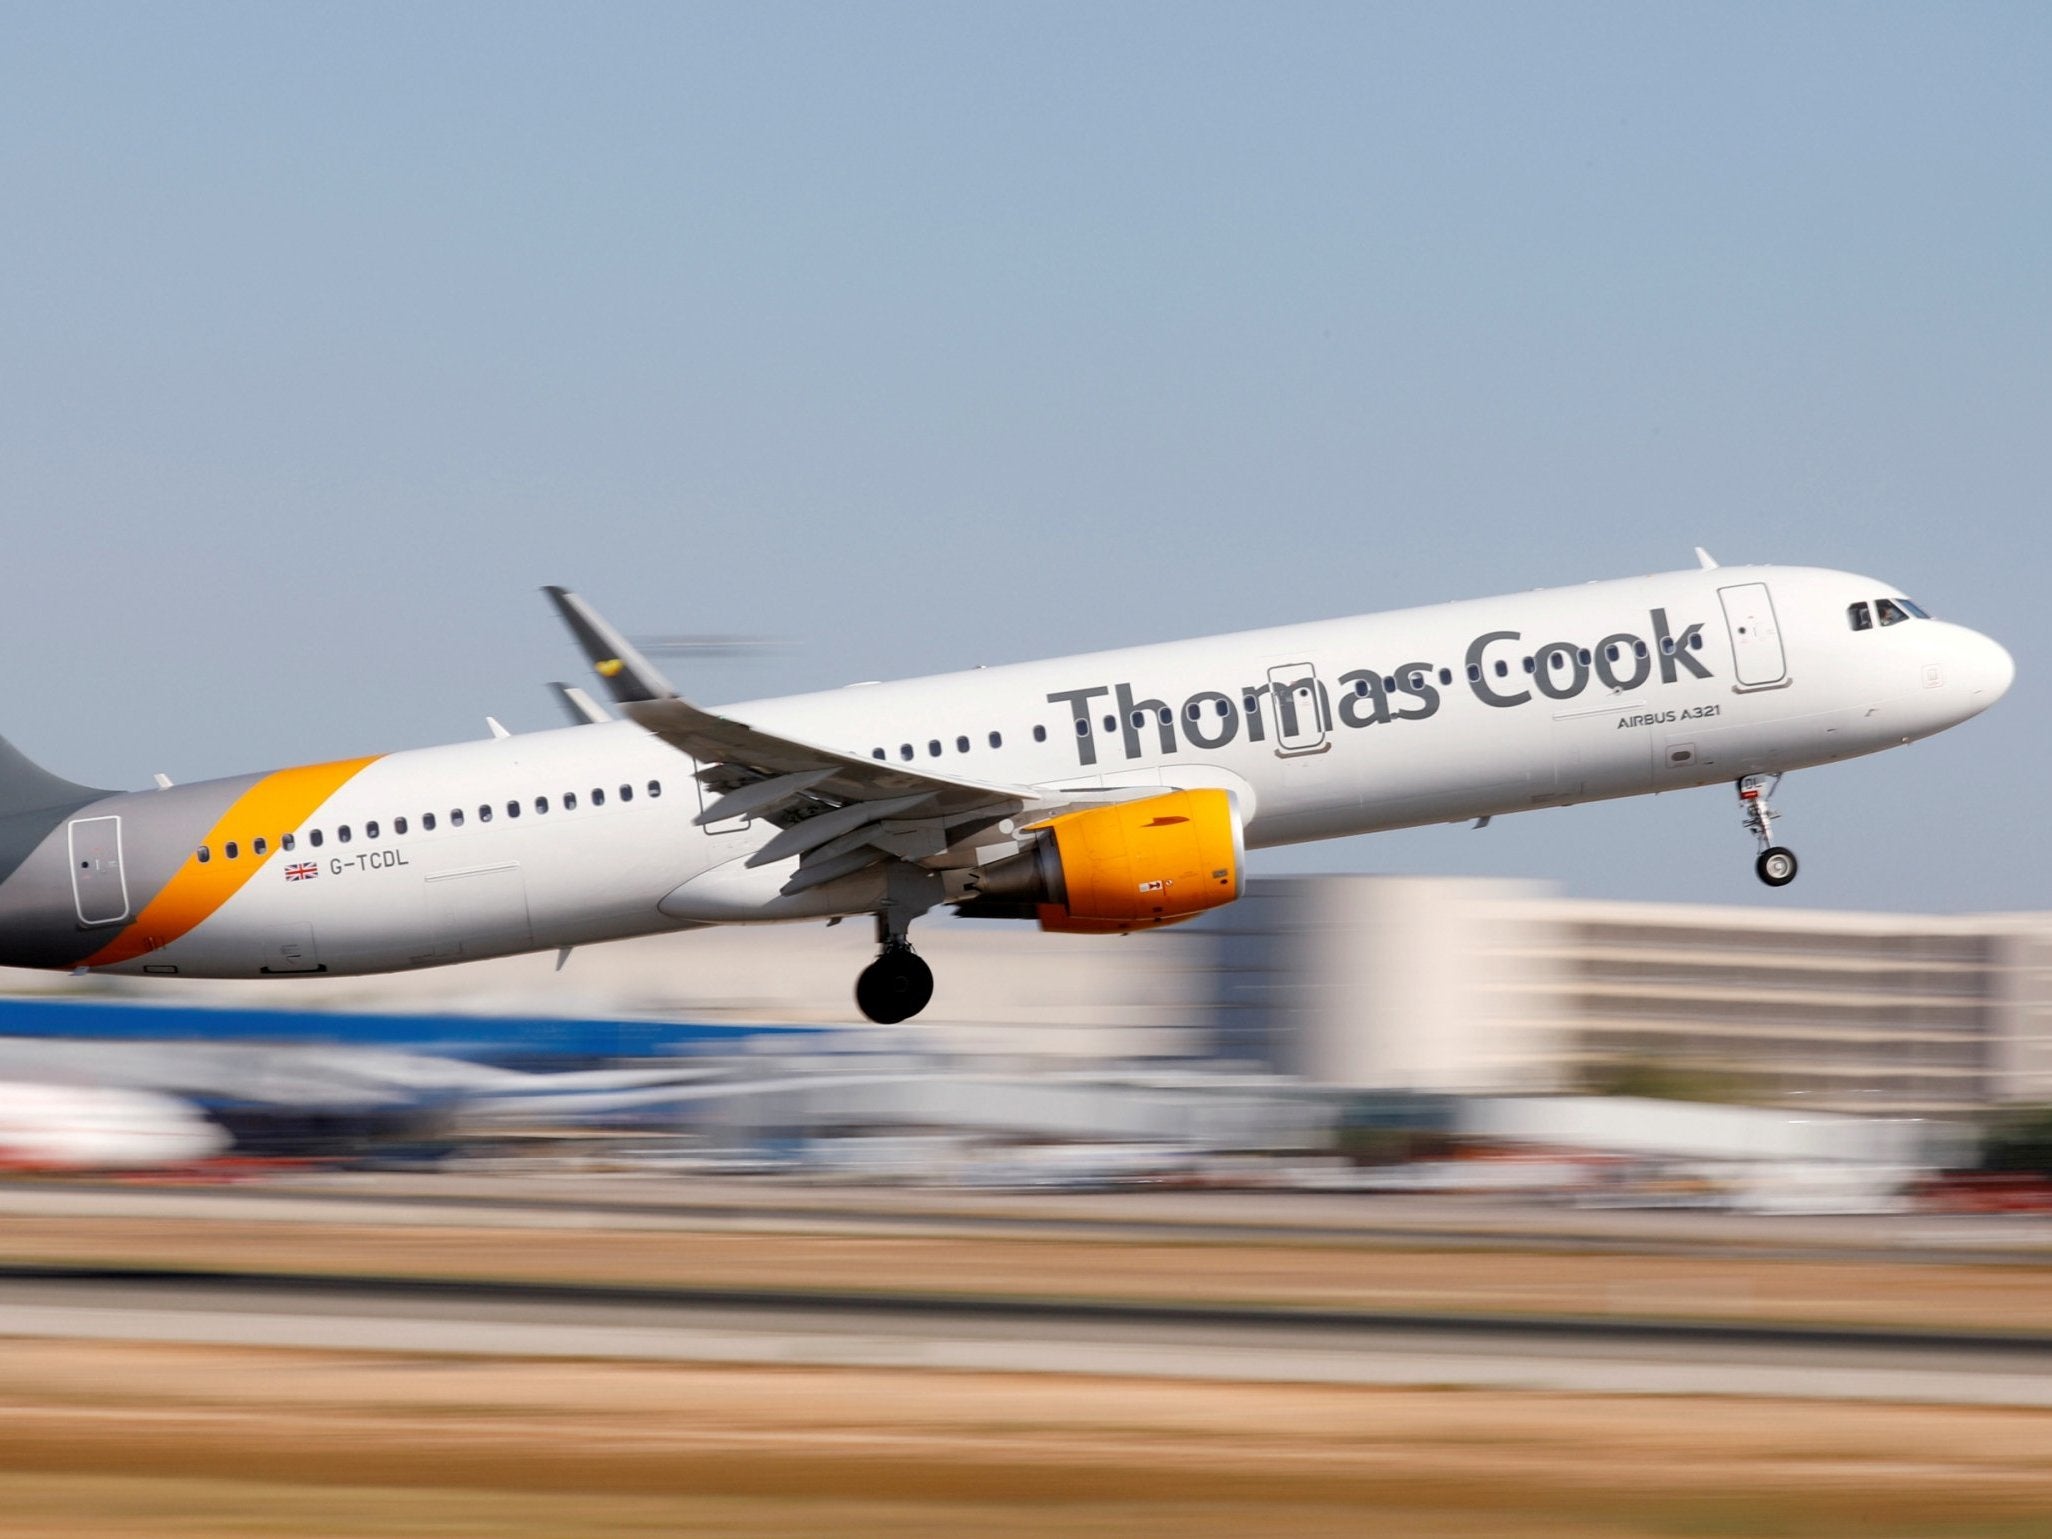 Thomas Cook posted a £1.5bn half-year loss last month and said there was "little doubt" that Brexit had prompted customers to put off their holiday plans